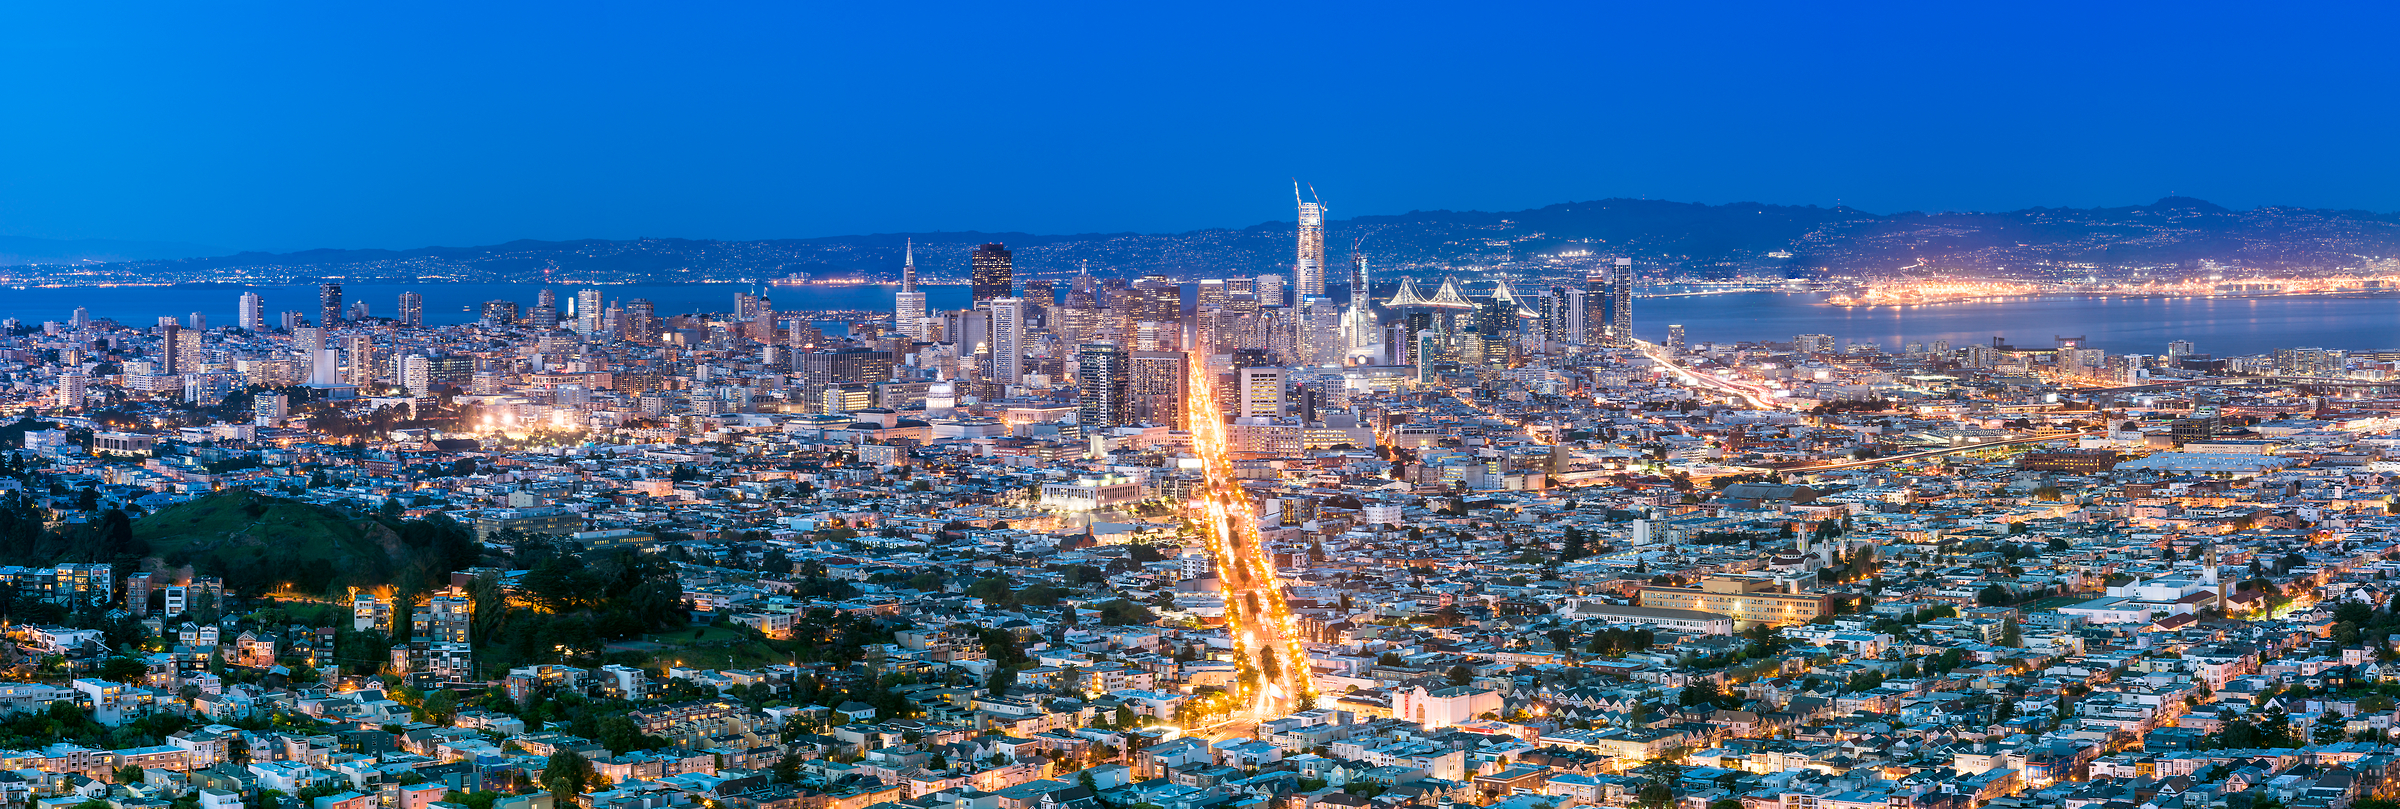 363 megapixels! A very high resolution, large-format VAST photo of the Downtown San Francisco city skyline at sunset dusk; fine art cityscape photograph created by Justin Katz in California.